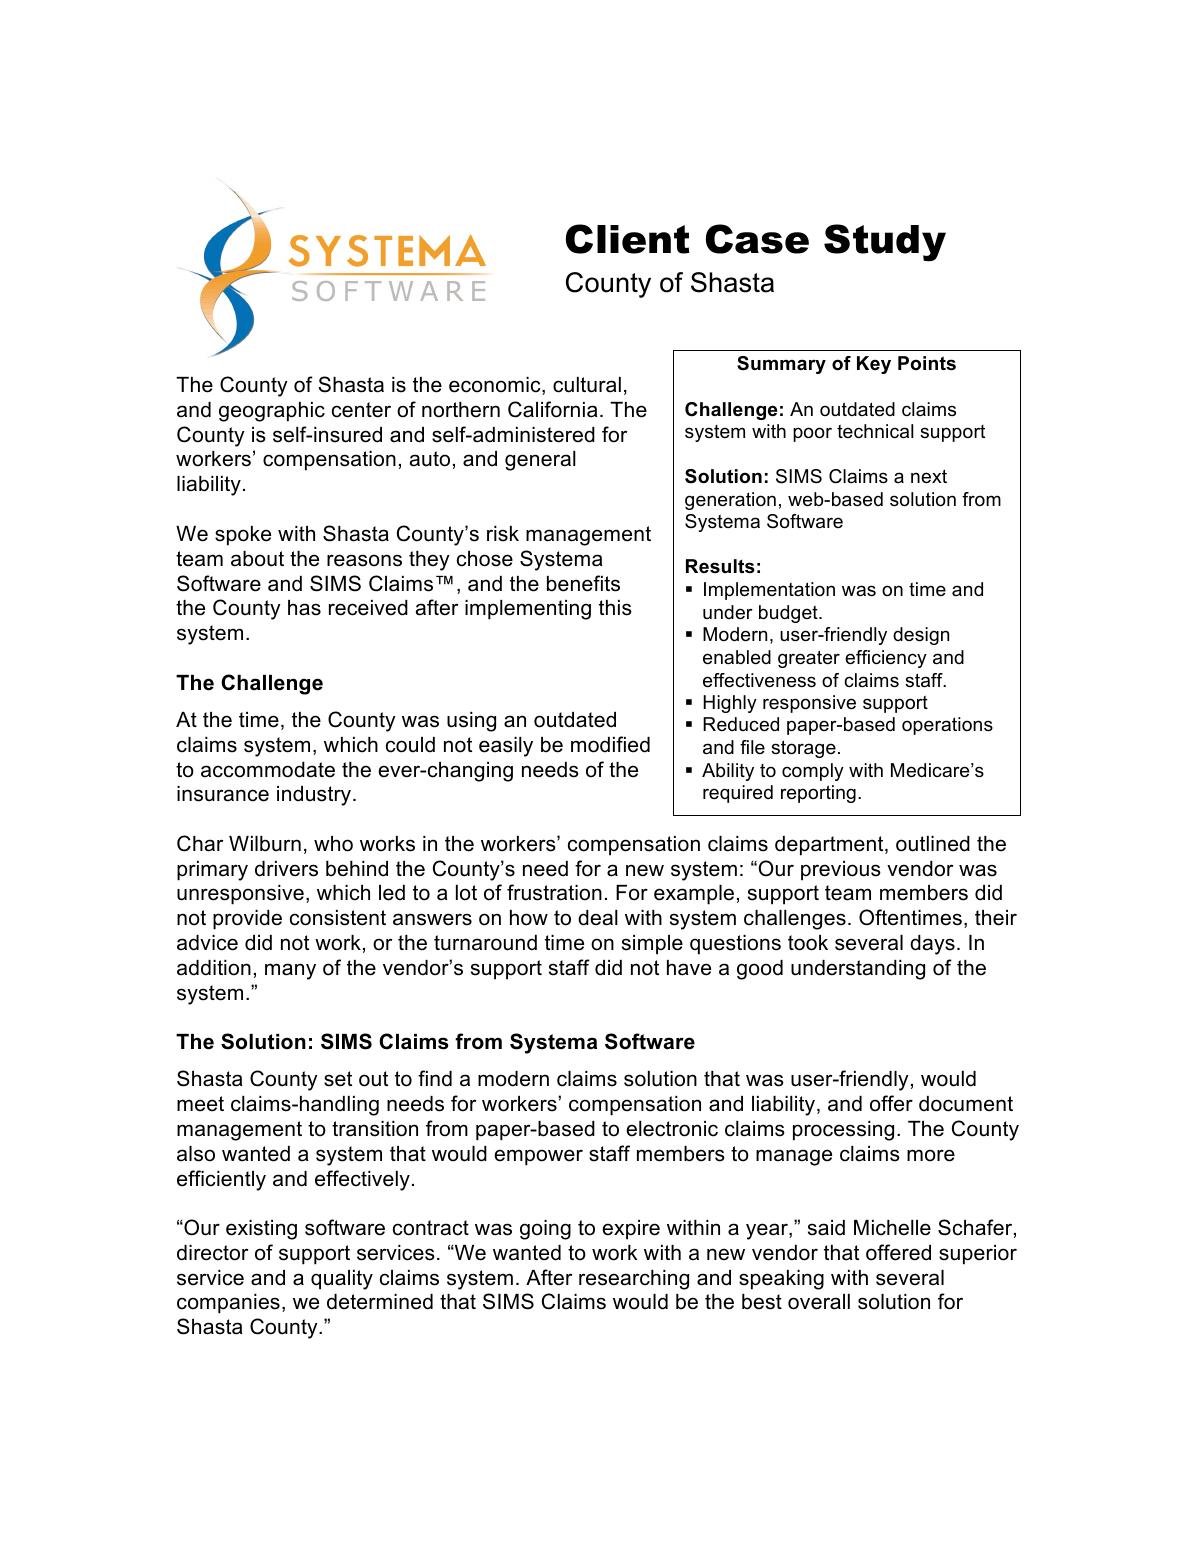 Client Case Study: County of Shasta